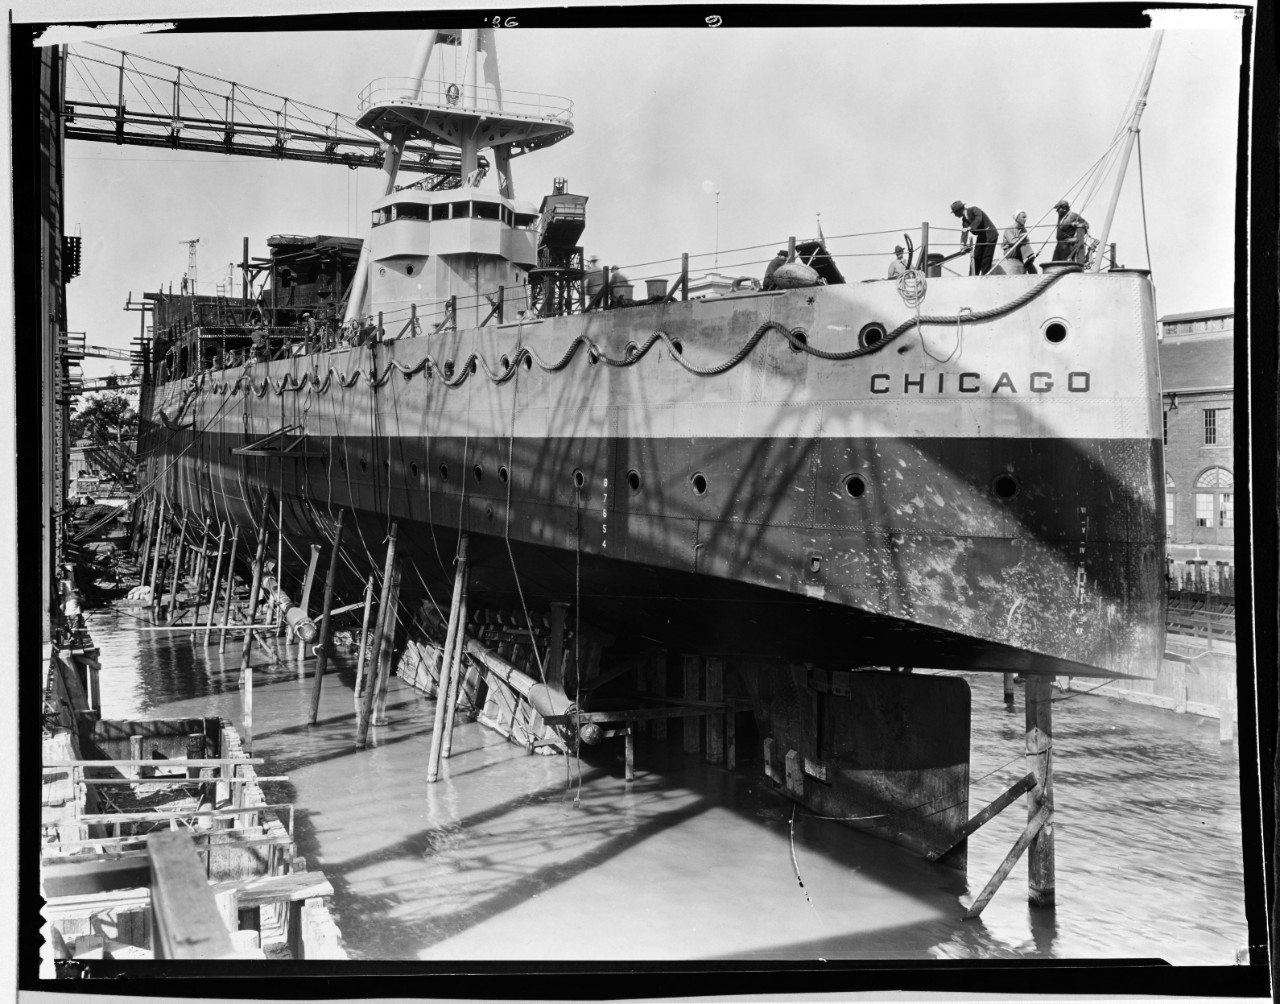 USS CHICAGO (CL-29)